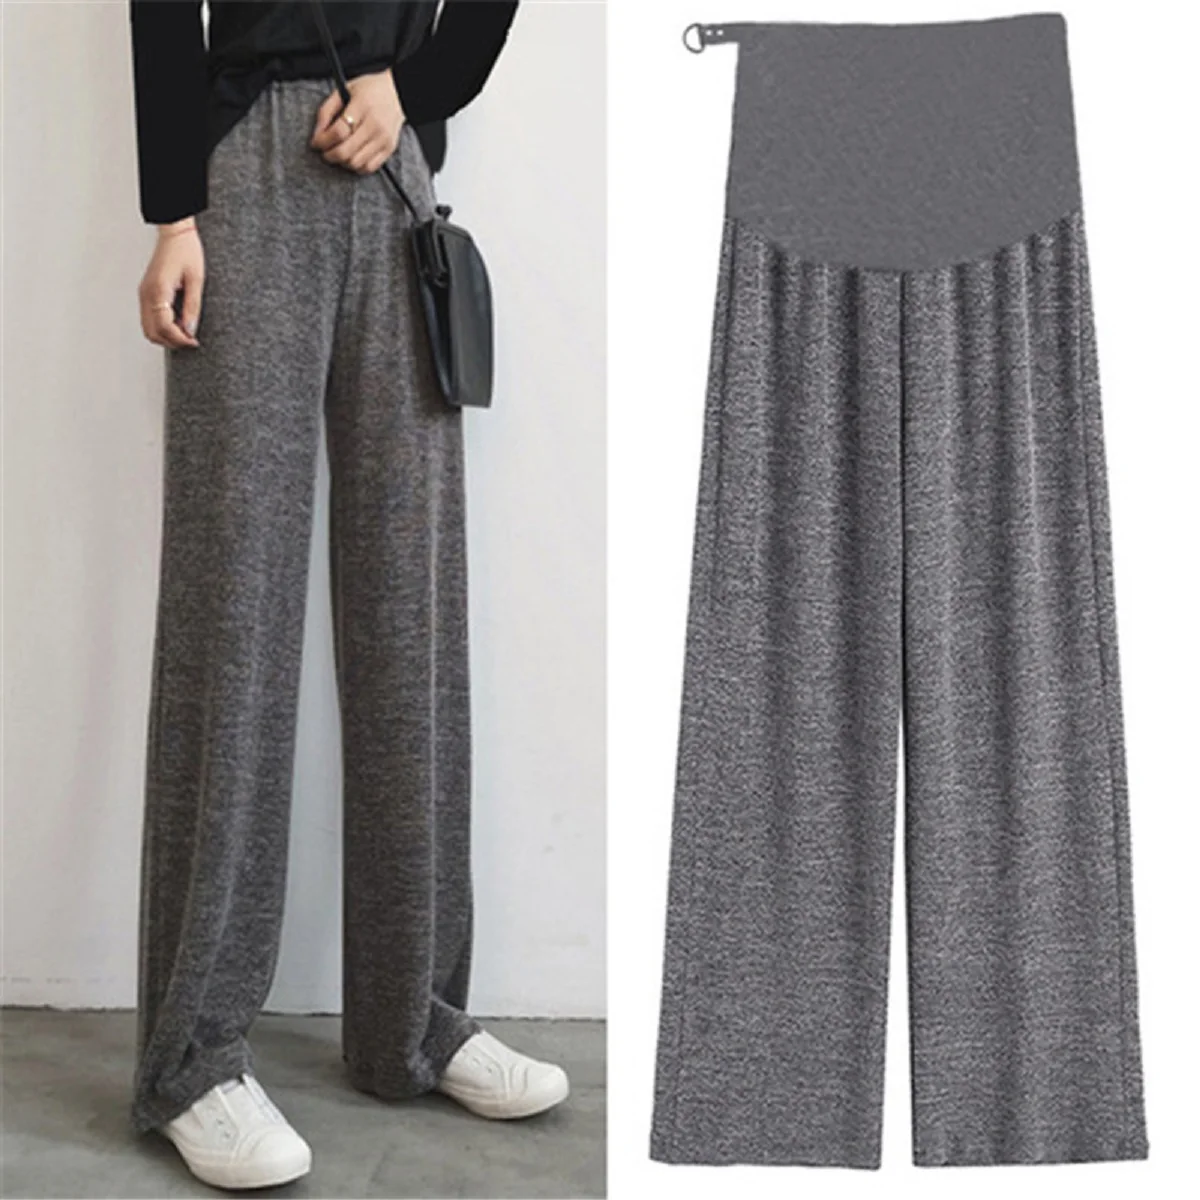 women wool pants thick 2020 winter warm solid color pant casual female high waist loose trousers women pant plus size 2xl High Waist Belly Pant Maternity Legging Pant Spring Autumn Elastic Pregnant Pant Trouser Loose Pregnant Women Pants Plus Size